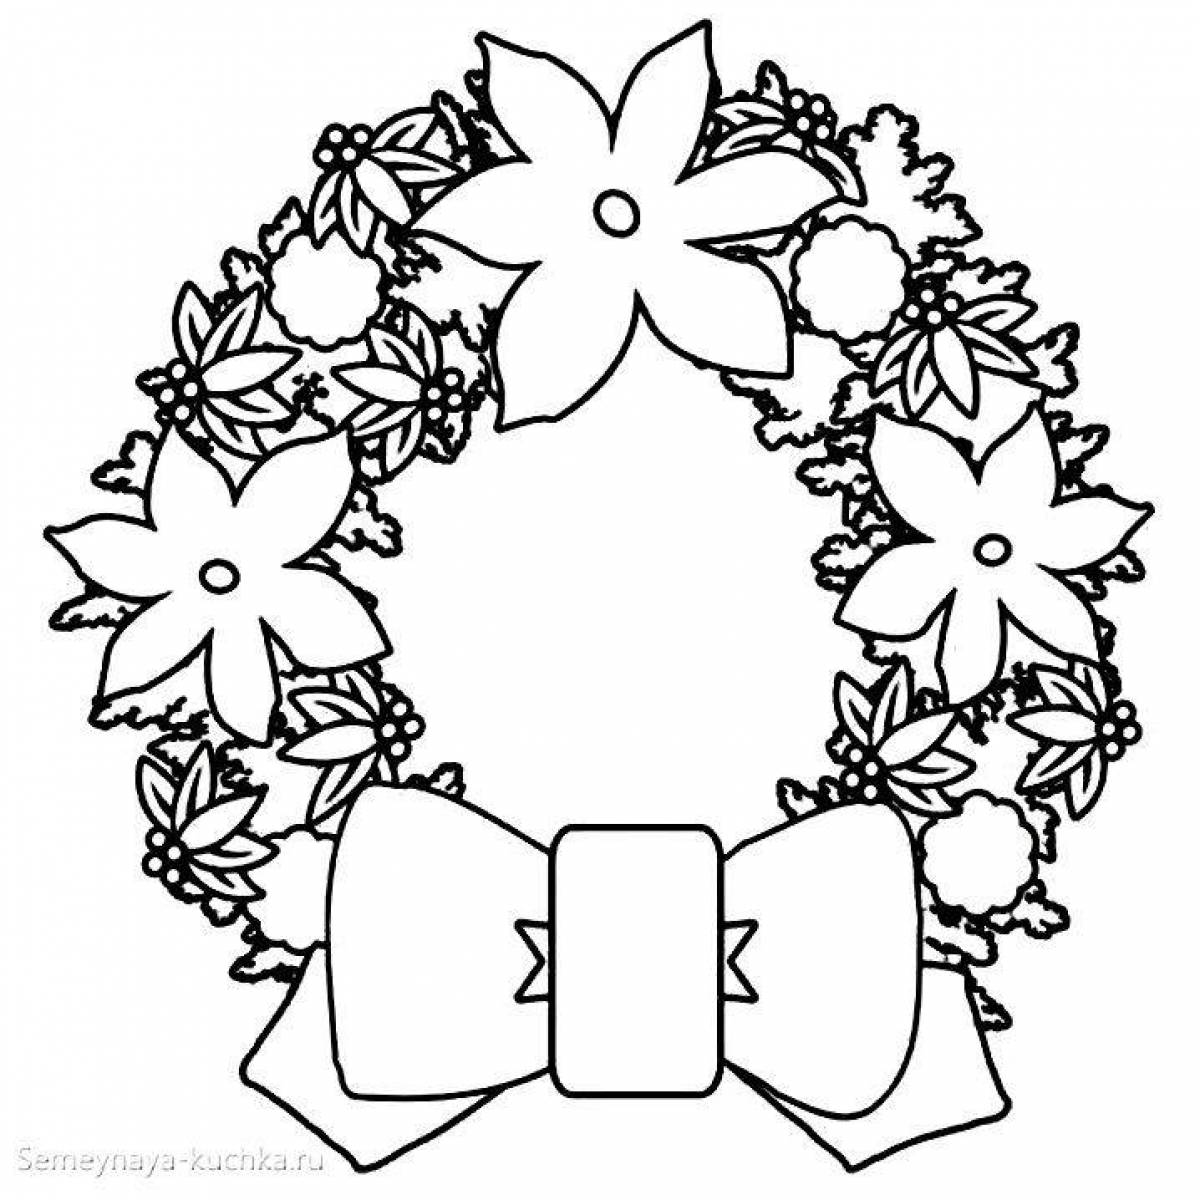 Majestic Christmas wreath coloring page